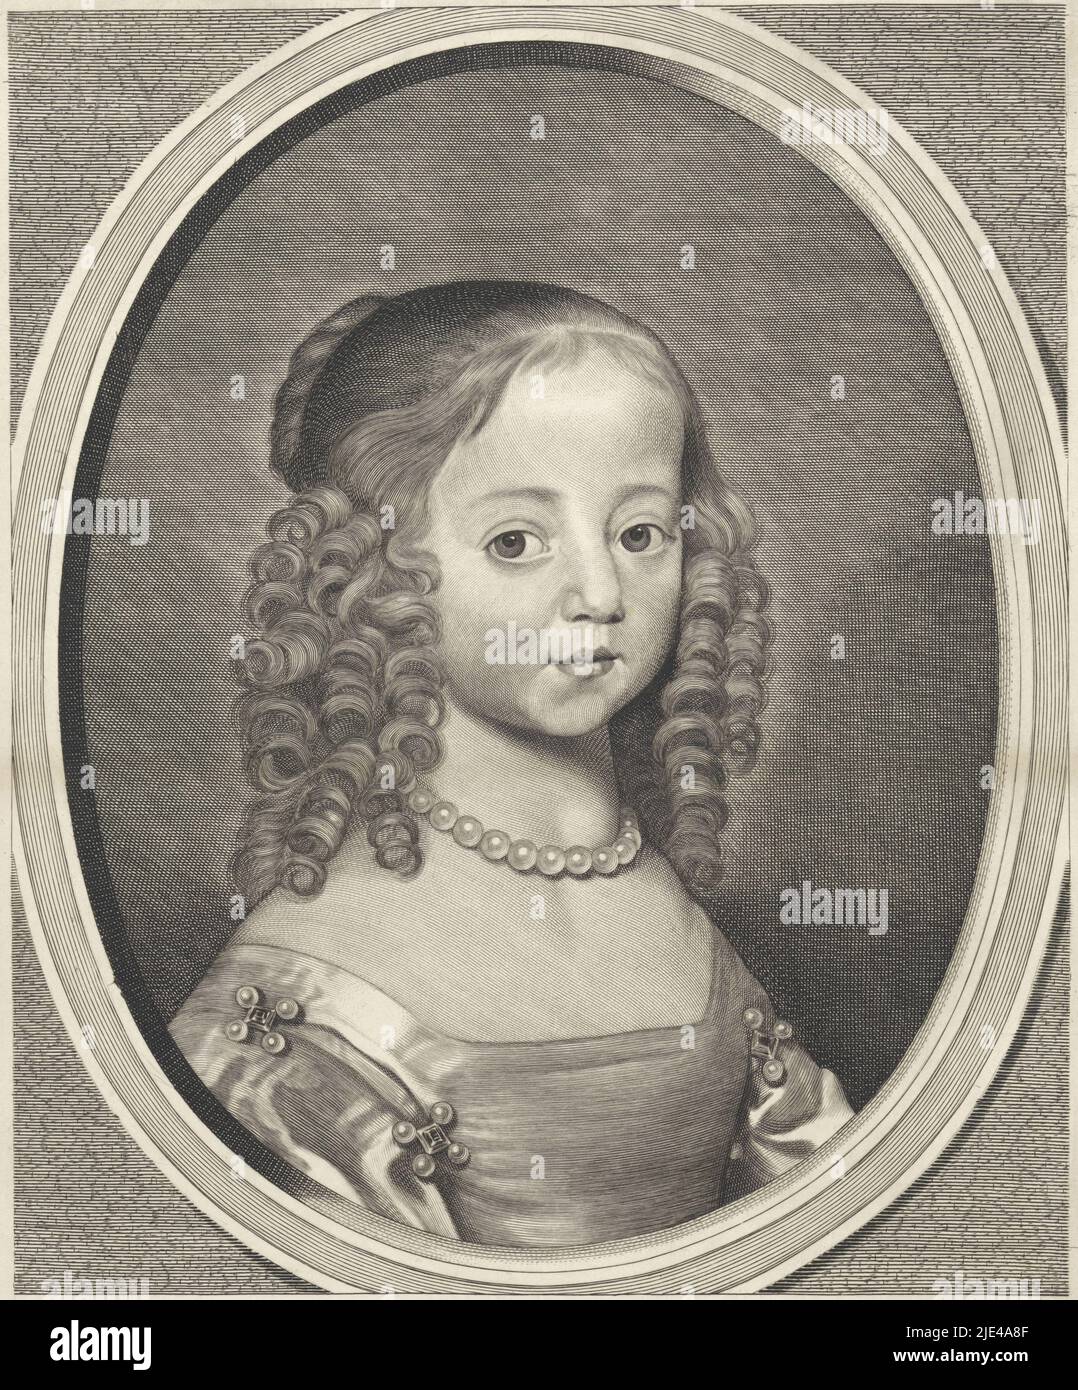 Portrait of Maria, Princess of Orange-Nassau, Cornelis Visscher (II), after Gerard van Honthorst, 1649, Maria, Princess of Orange at a young age. Around her neck a pearl necklace. Print from a series of 9 prints with Orange portraits., print maker: Cornelis Visscher (II), (mentioned on object), after: Gerard van Honthorst, (mentioned on object), Pieter Claesz. Soutman, (mentioned on object), Haarlem, 1649, paper, engraving, h 419 mm × w 306 mm Stock Photo